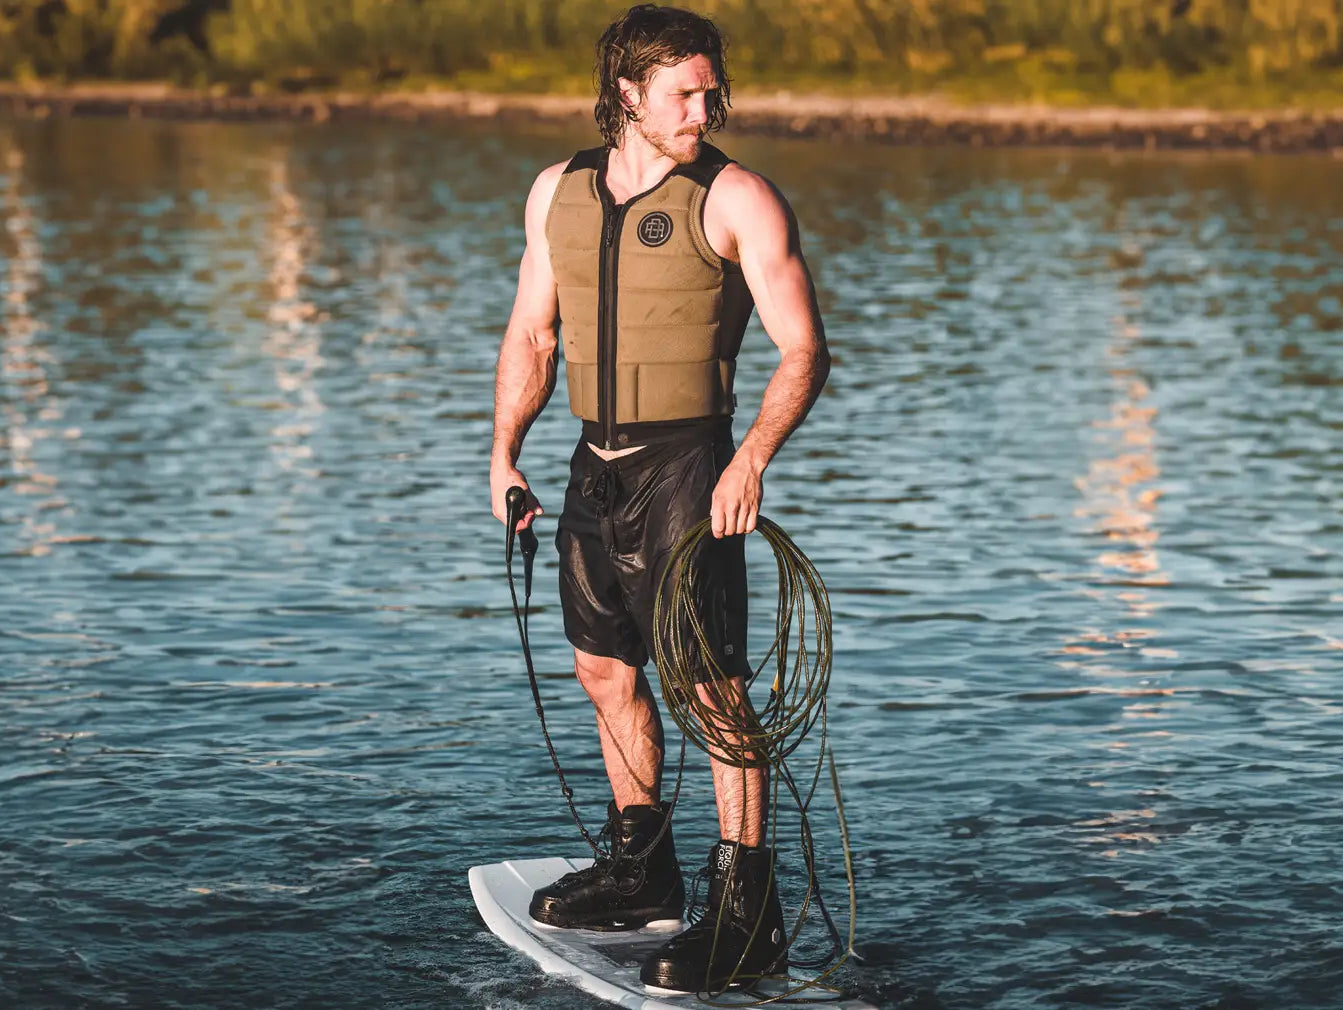 Do you need a short-fit life vest?